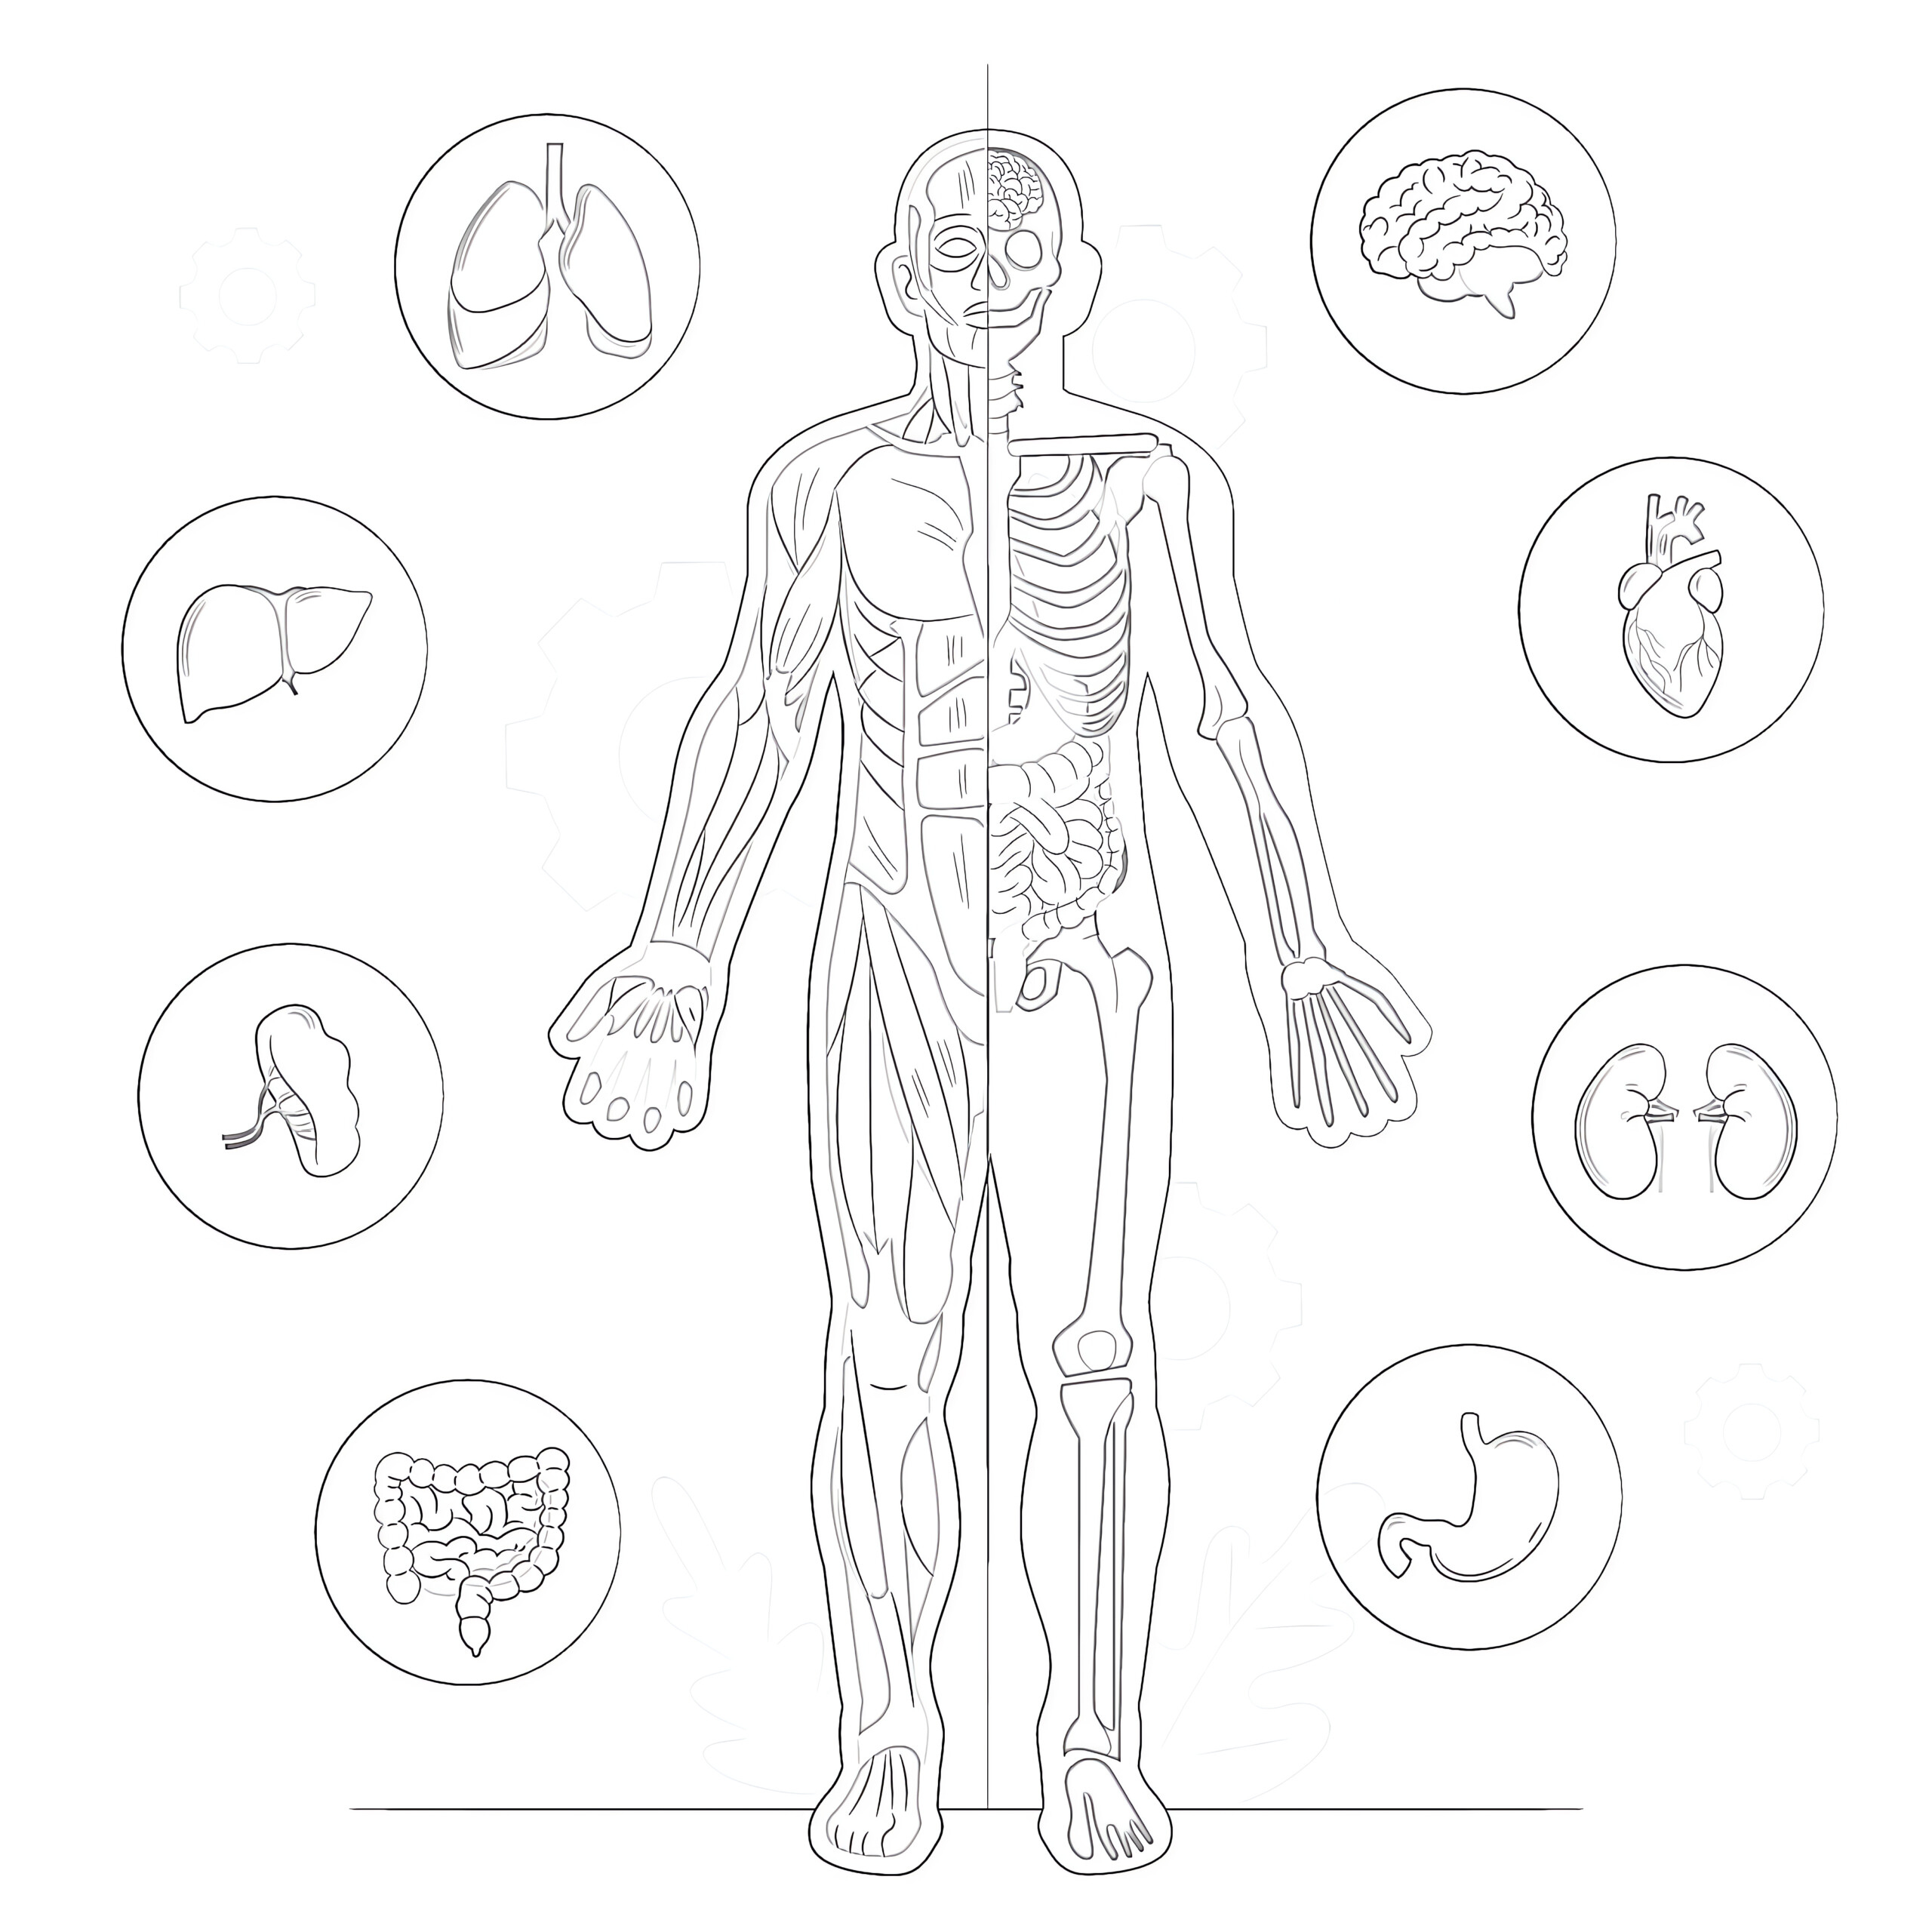 Printable Body Anatomy Coloring Page - Mimi Panda regarding Free Printable Human Anatomy Coloring Pages